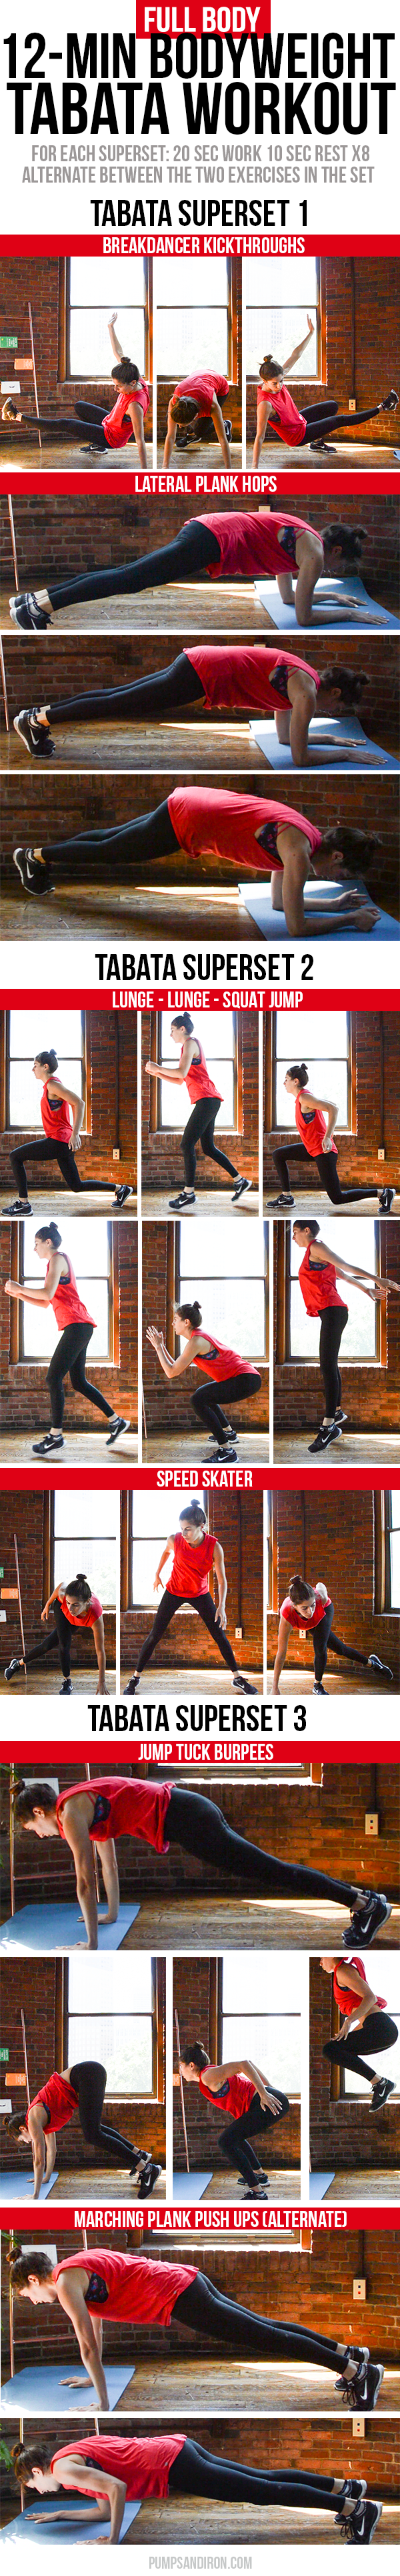 Full-Body & Cardio Tabata Workout - 12 minute long and made up of three tabata supersets of bodyweight exercises